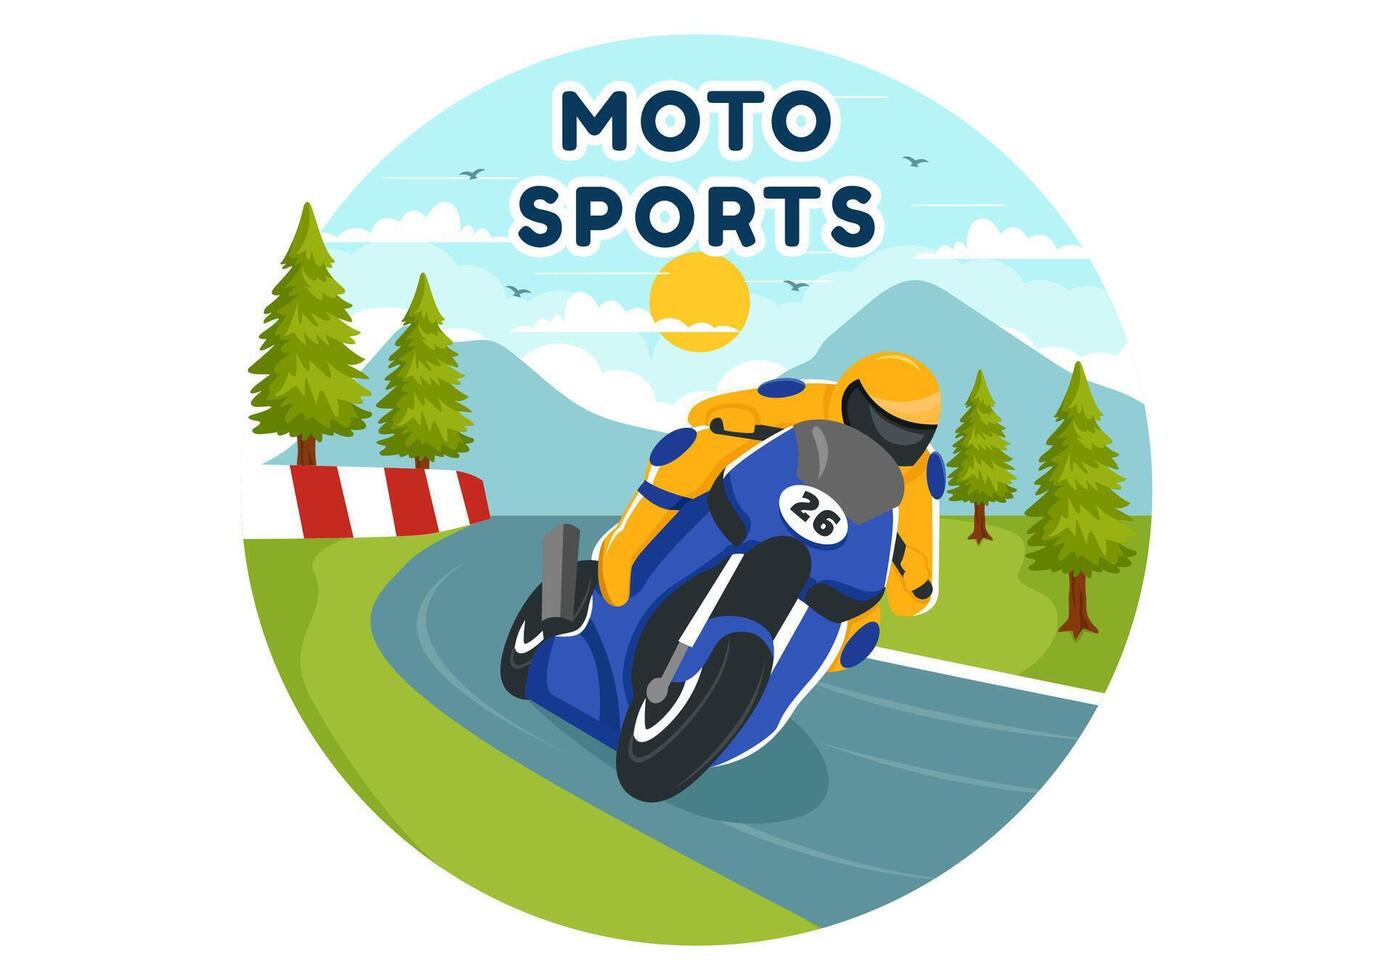 Racing Motosport Speed Bike Vector Illustration for Competition or Championship Race by Wearing Sportswear and Equipment in Flat Cartoon Background